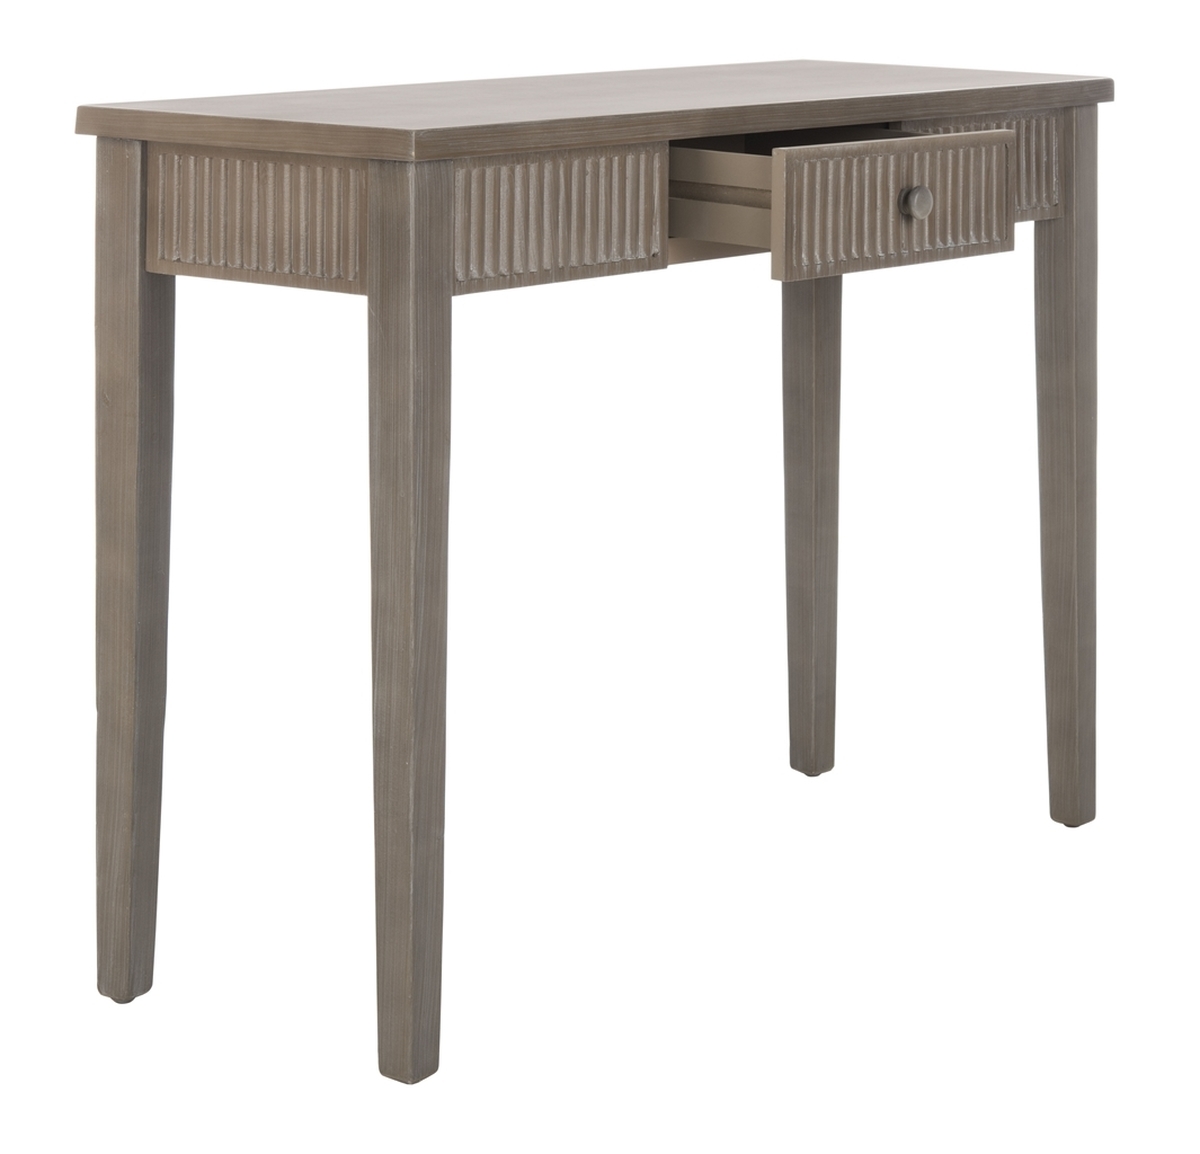 Beale Console With Storage Drawer - Grey - Arlo Home - Image 3